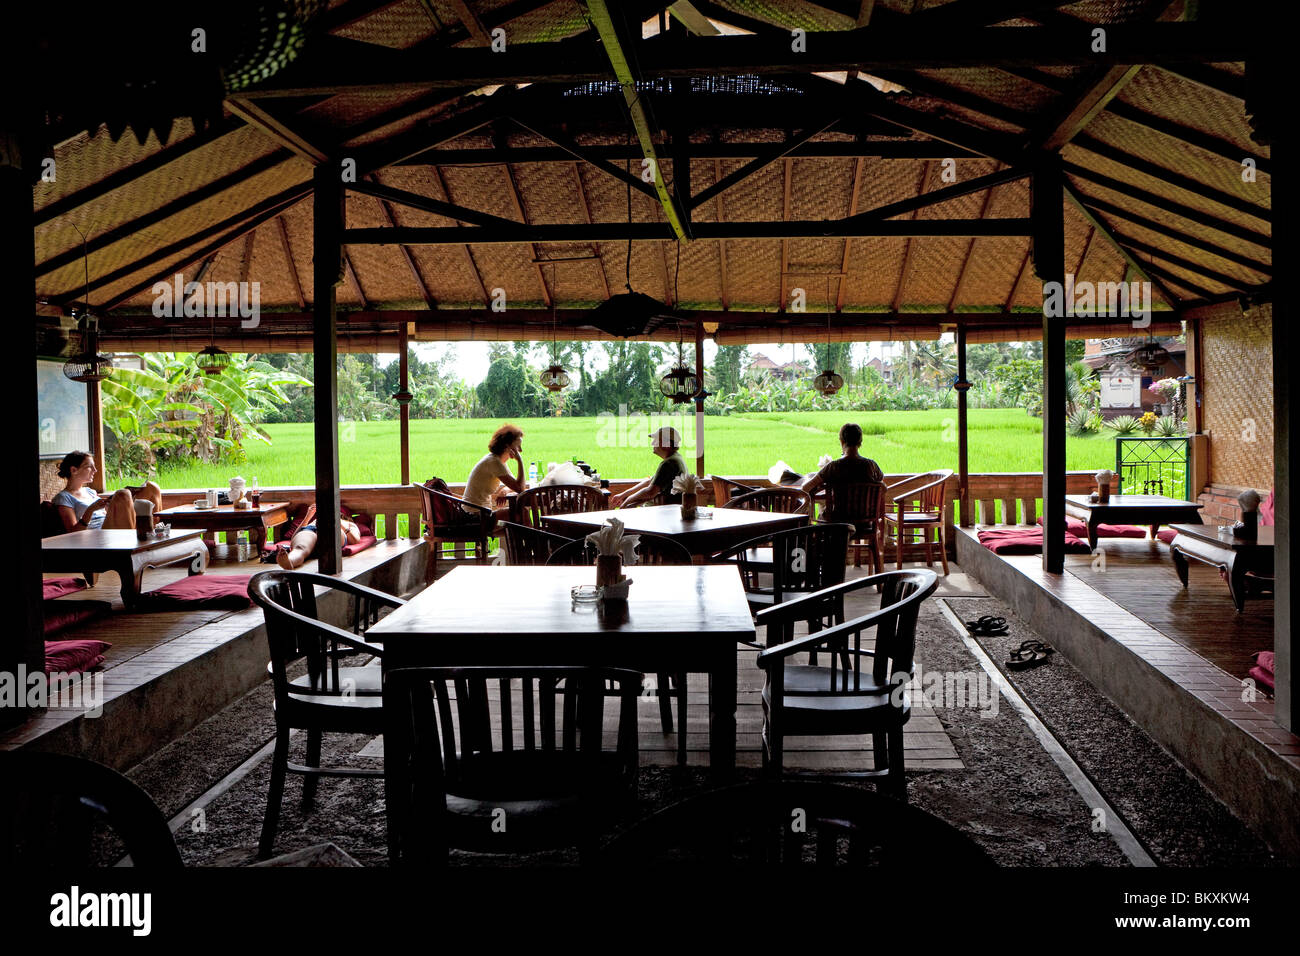 Restaurant with a view on the rice fields, Ubud, Bali, Indonesia Stock Photo